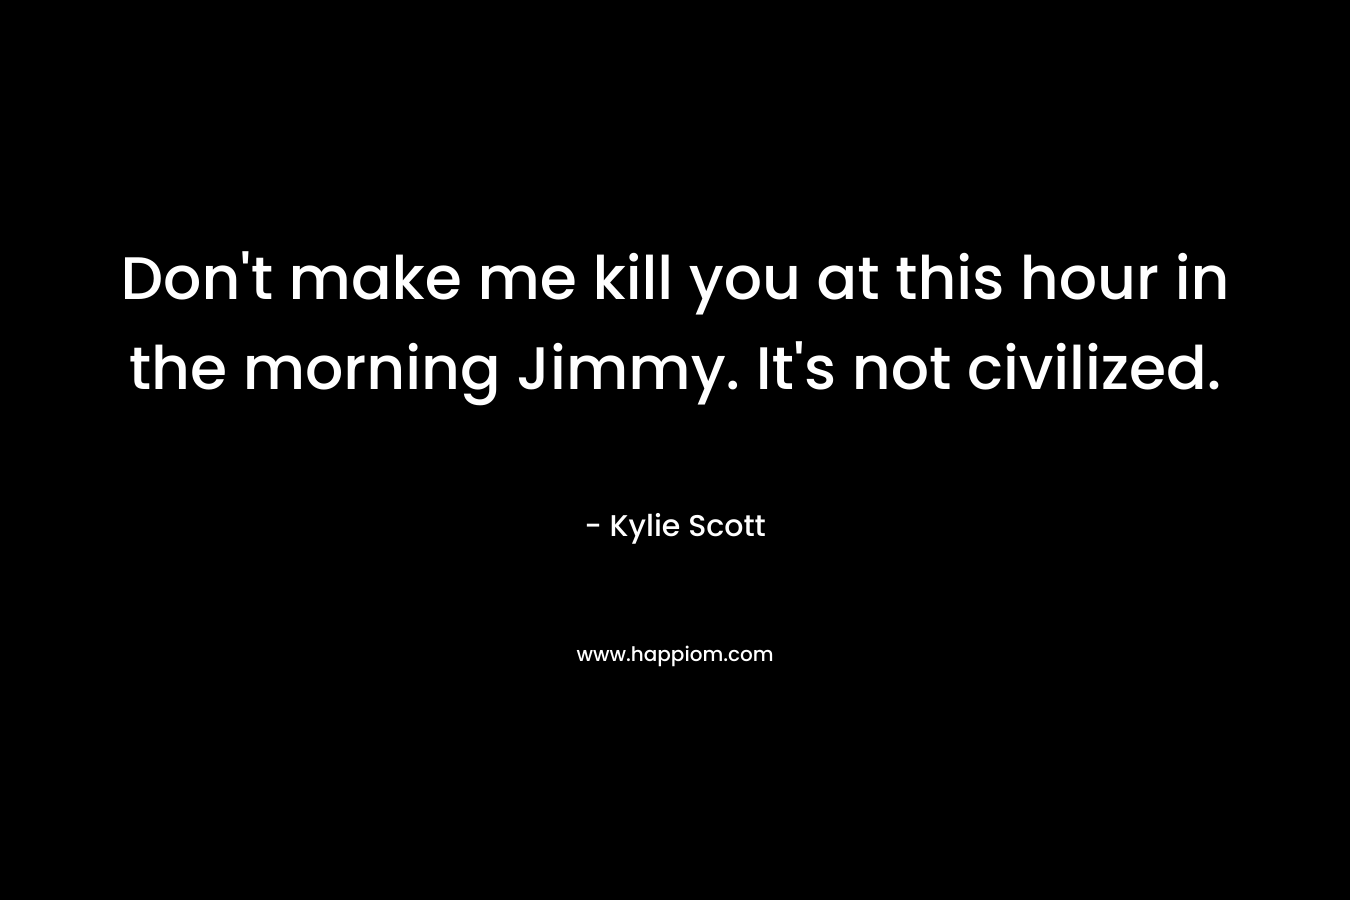 Don’t make me kill you at this hour in the morning Jimmy. It’s not civilized. – Kylie Scott